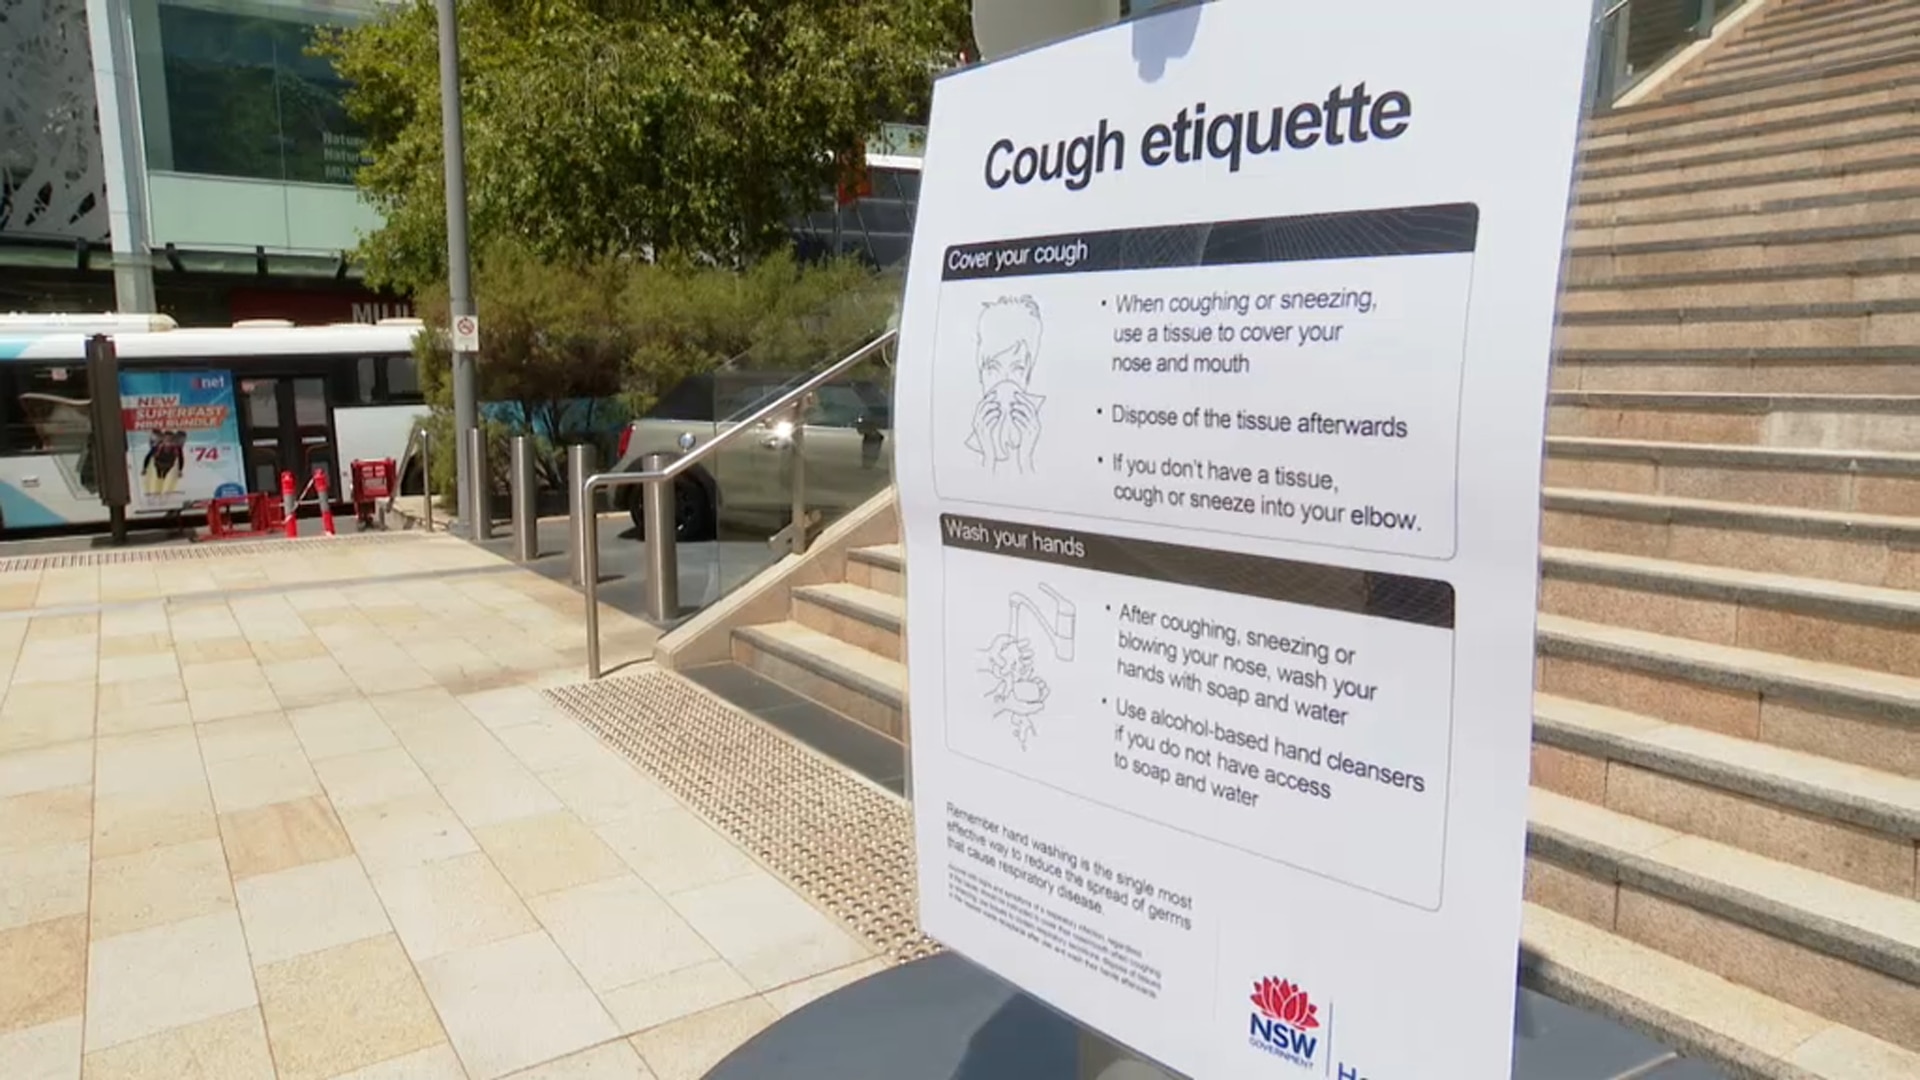 A sign in Chatswood, Sydney reminds people of cough etiquette.